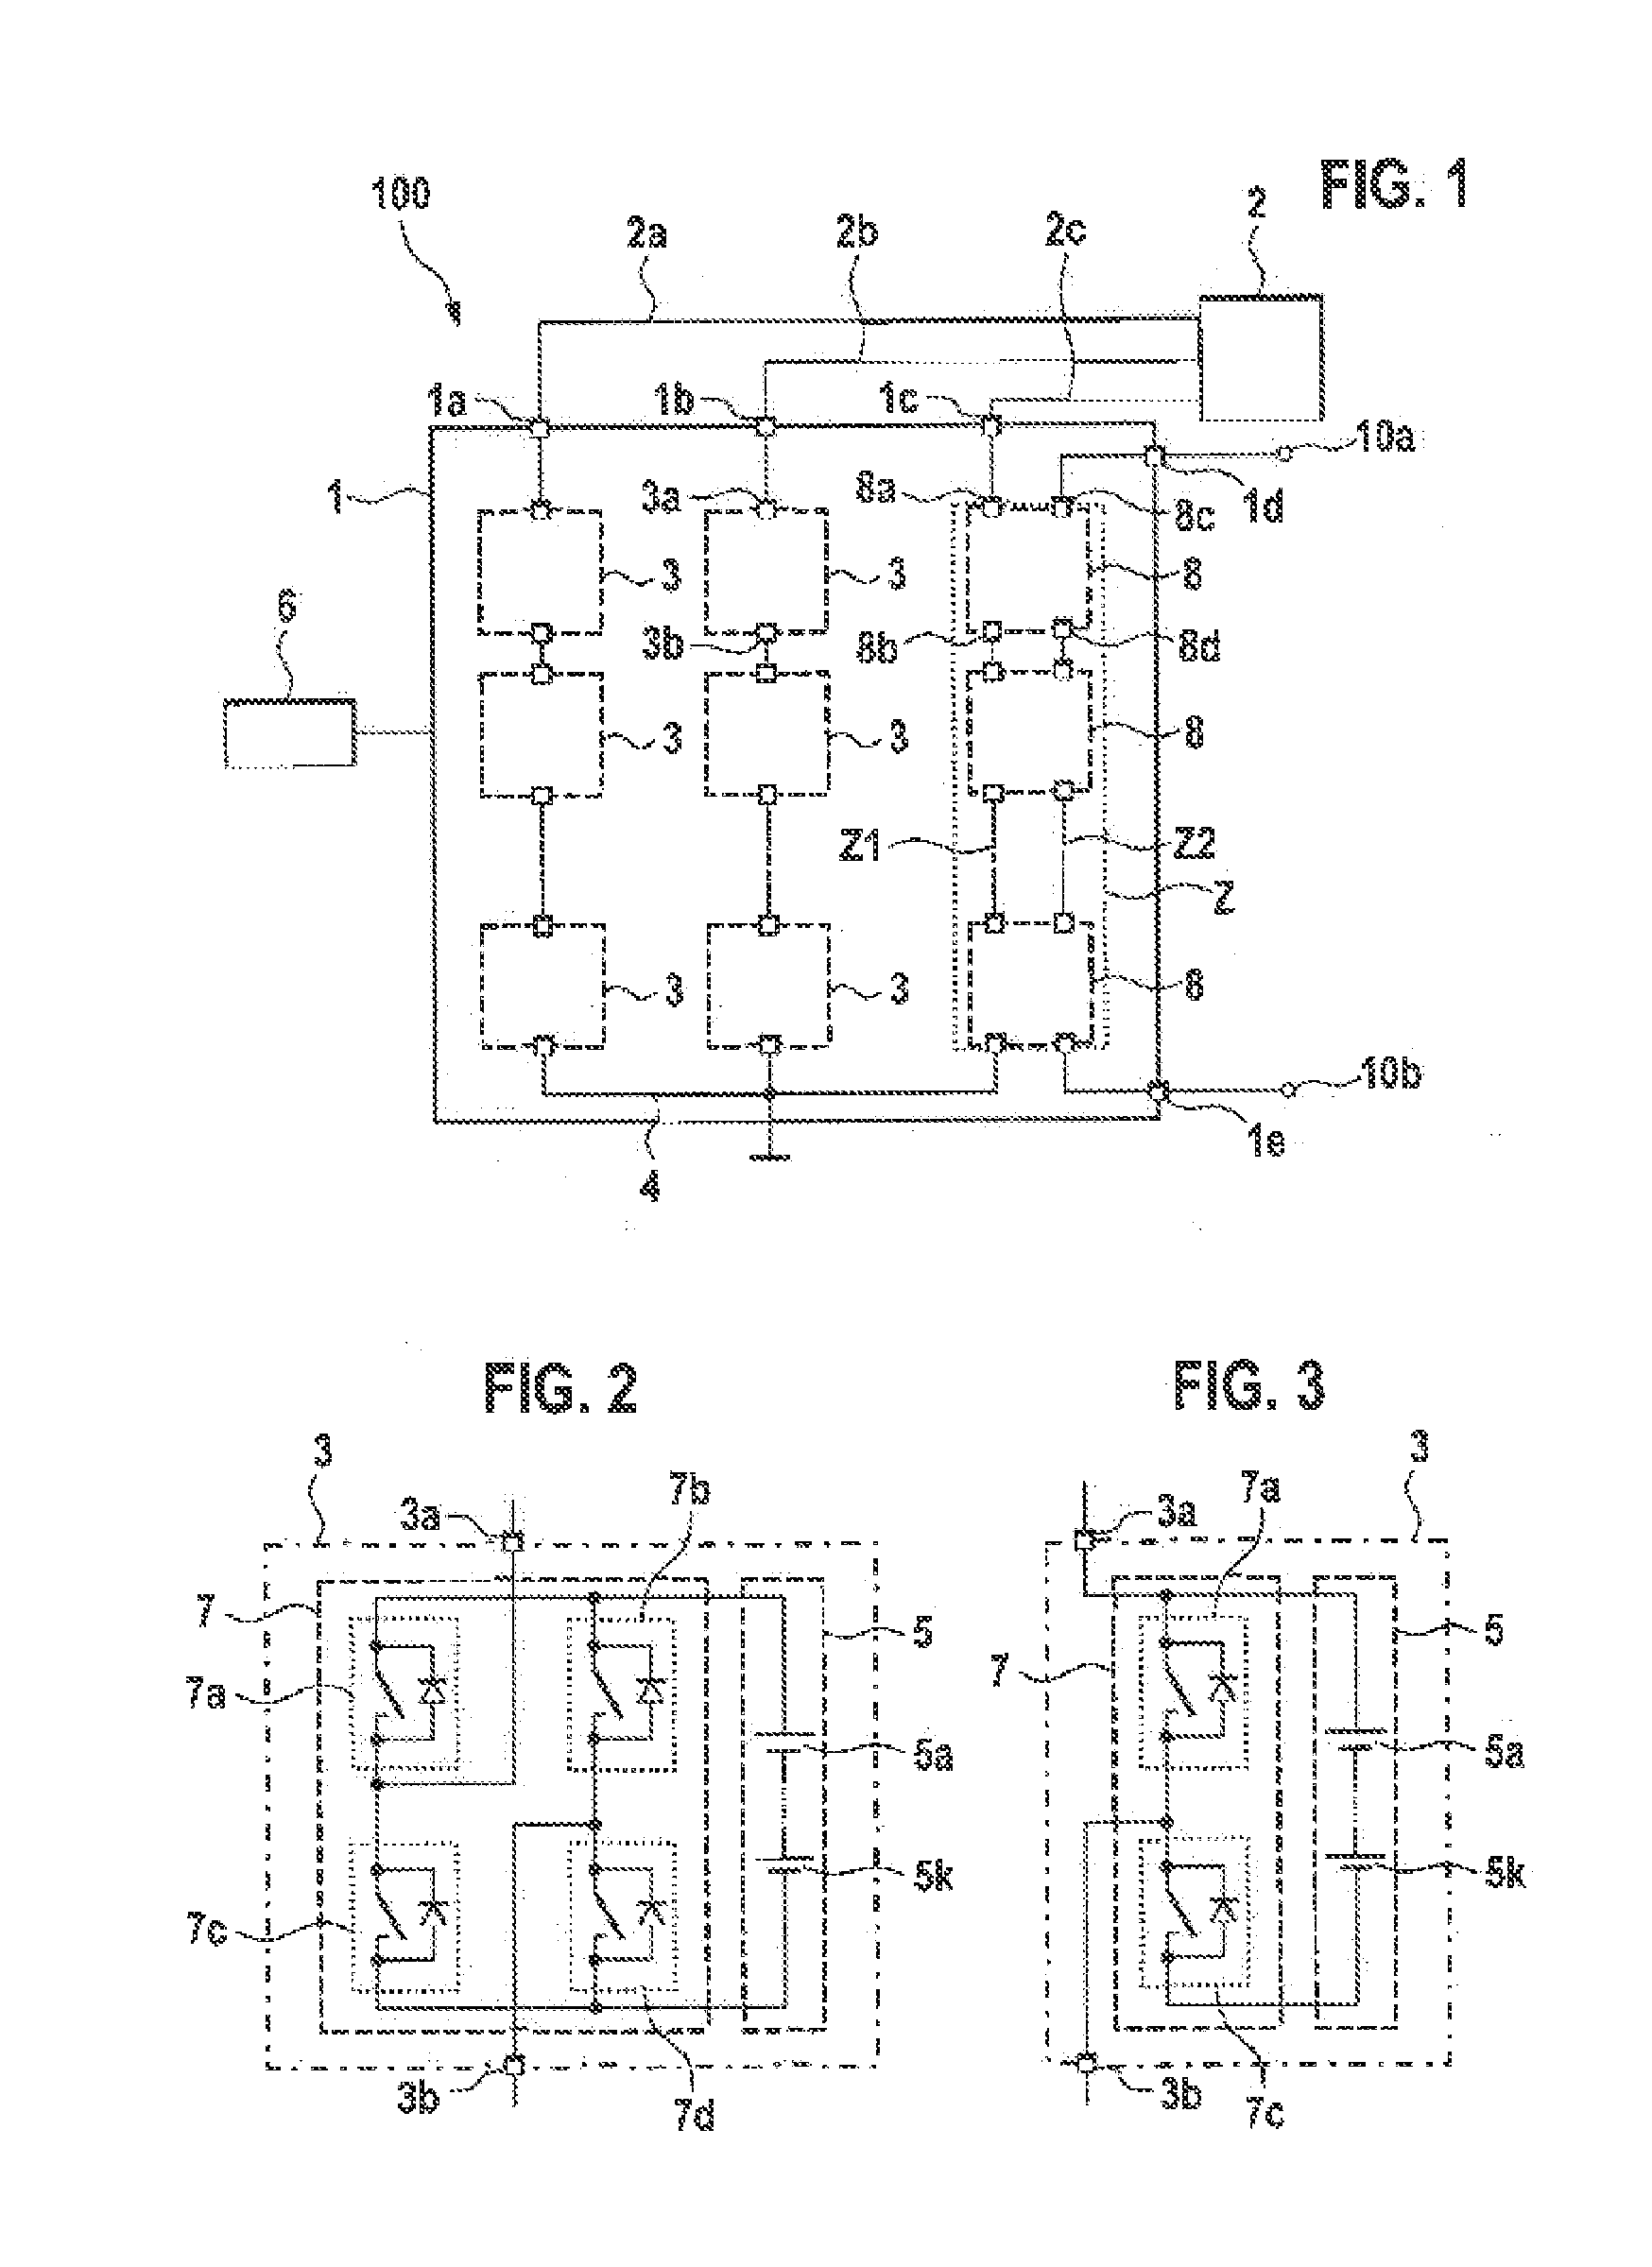 Energy storage device, system with energy storage device and method for driving an energy storage device